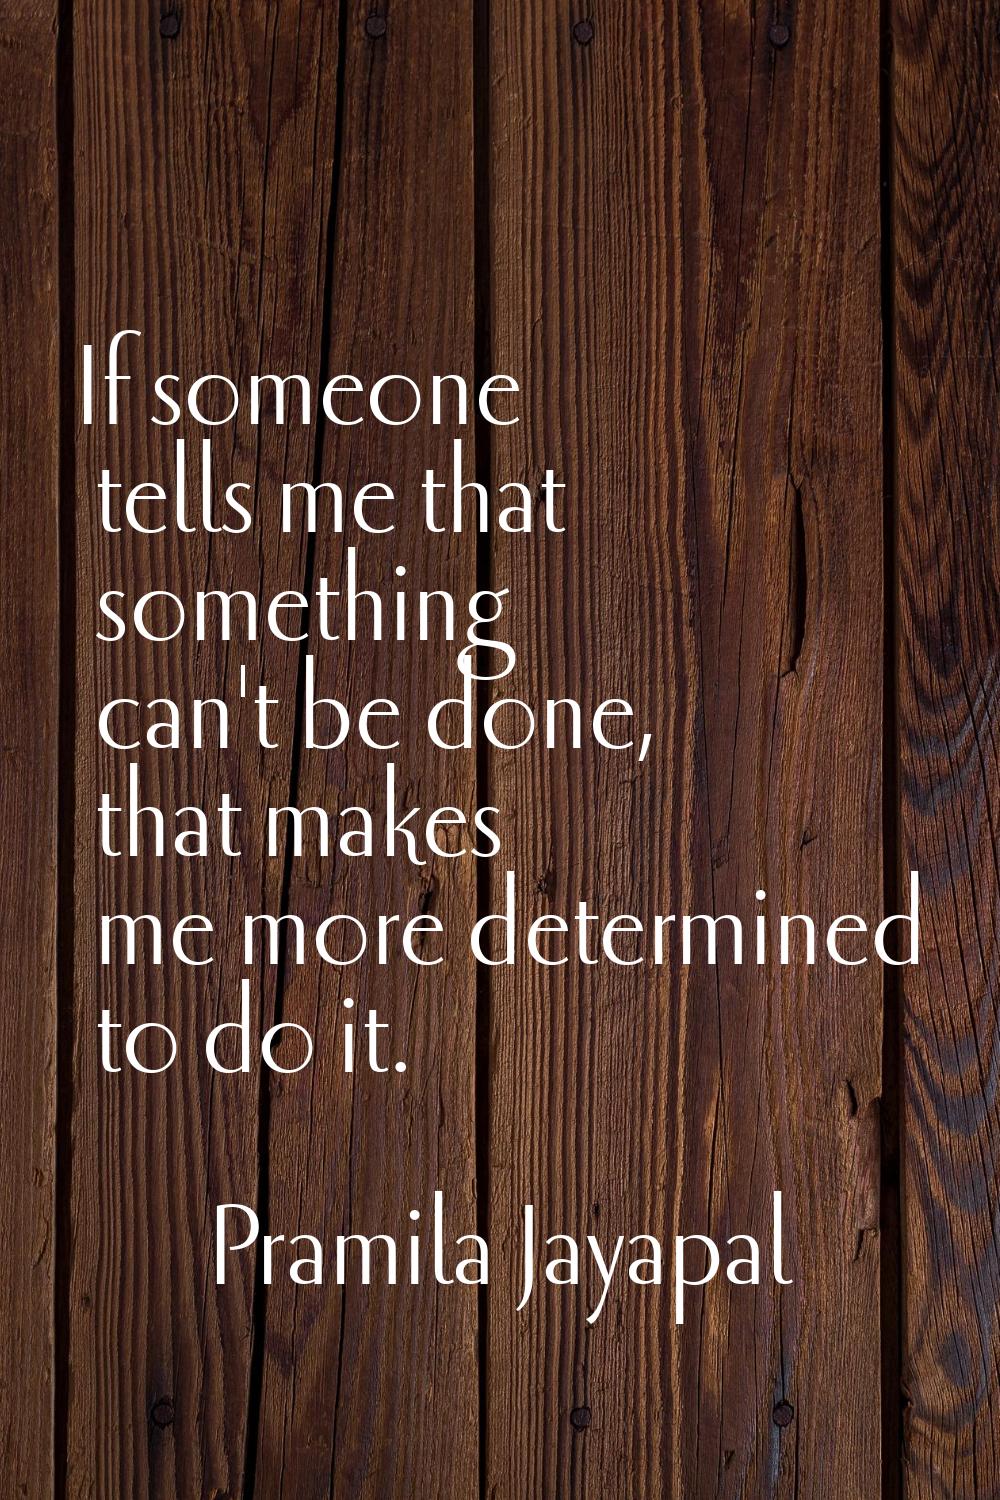 If someone tells me that something can't be done, that makes me more determined to do it.